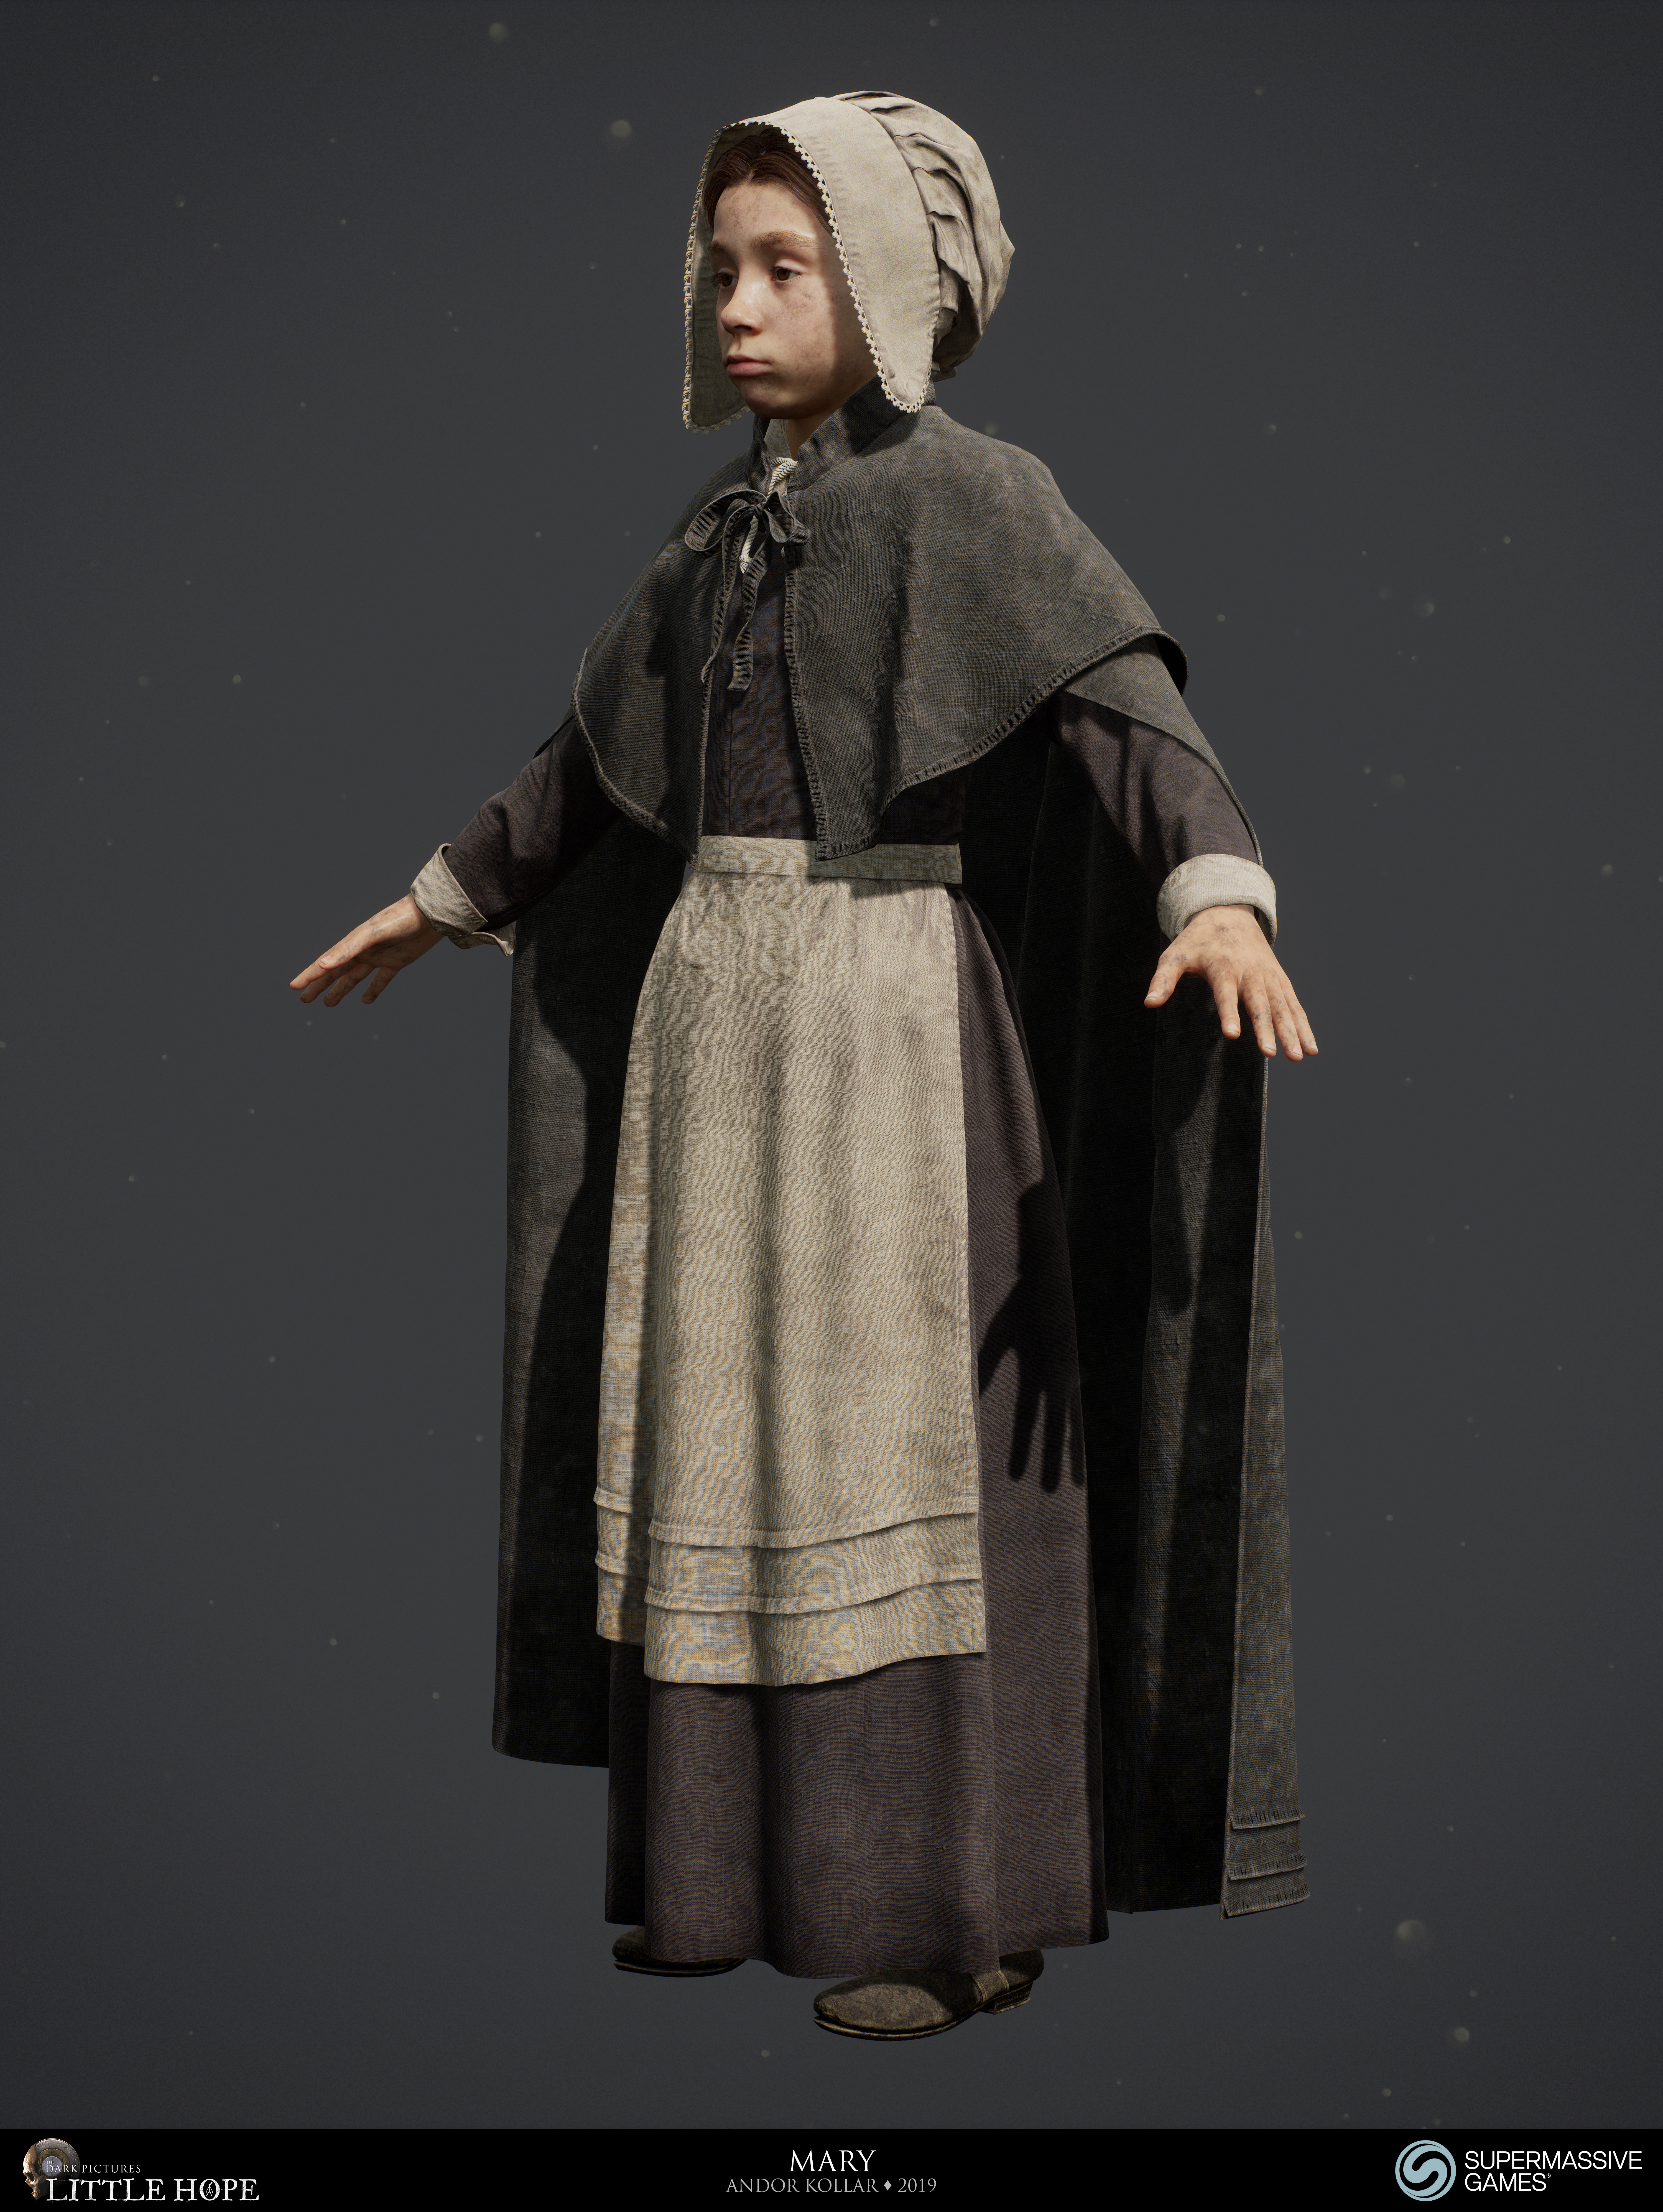 Little Hope, 3d game character, Mary, little girl with 17th century dress, bonnet, cloak, skirt, Unreal Engine, Andor Kollar